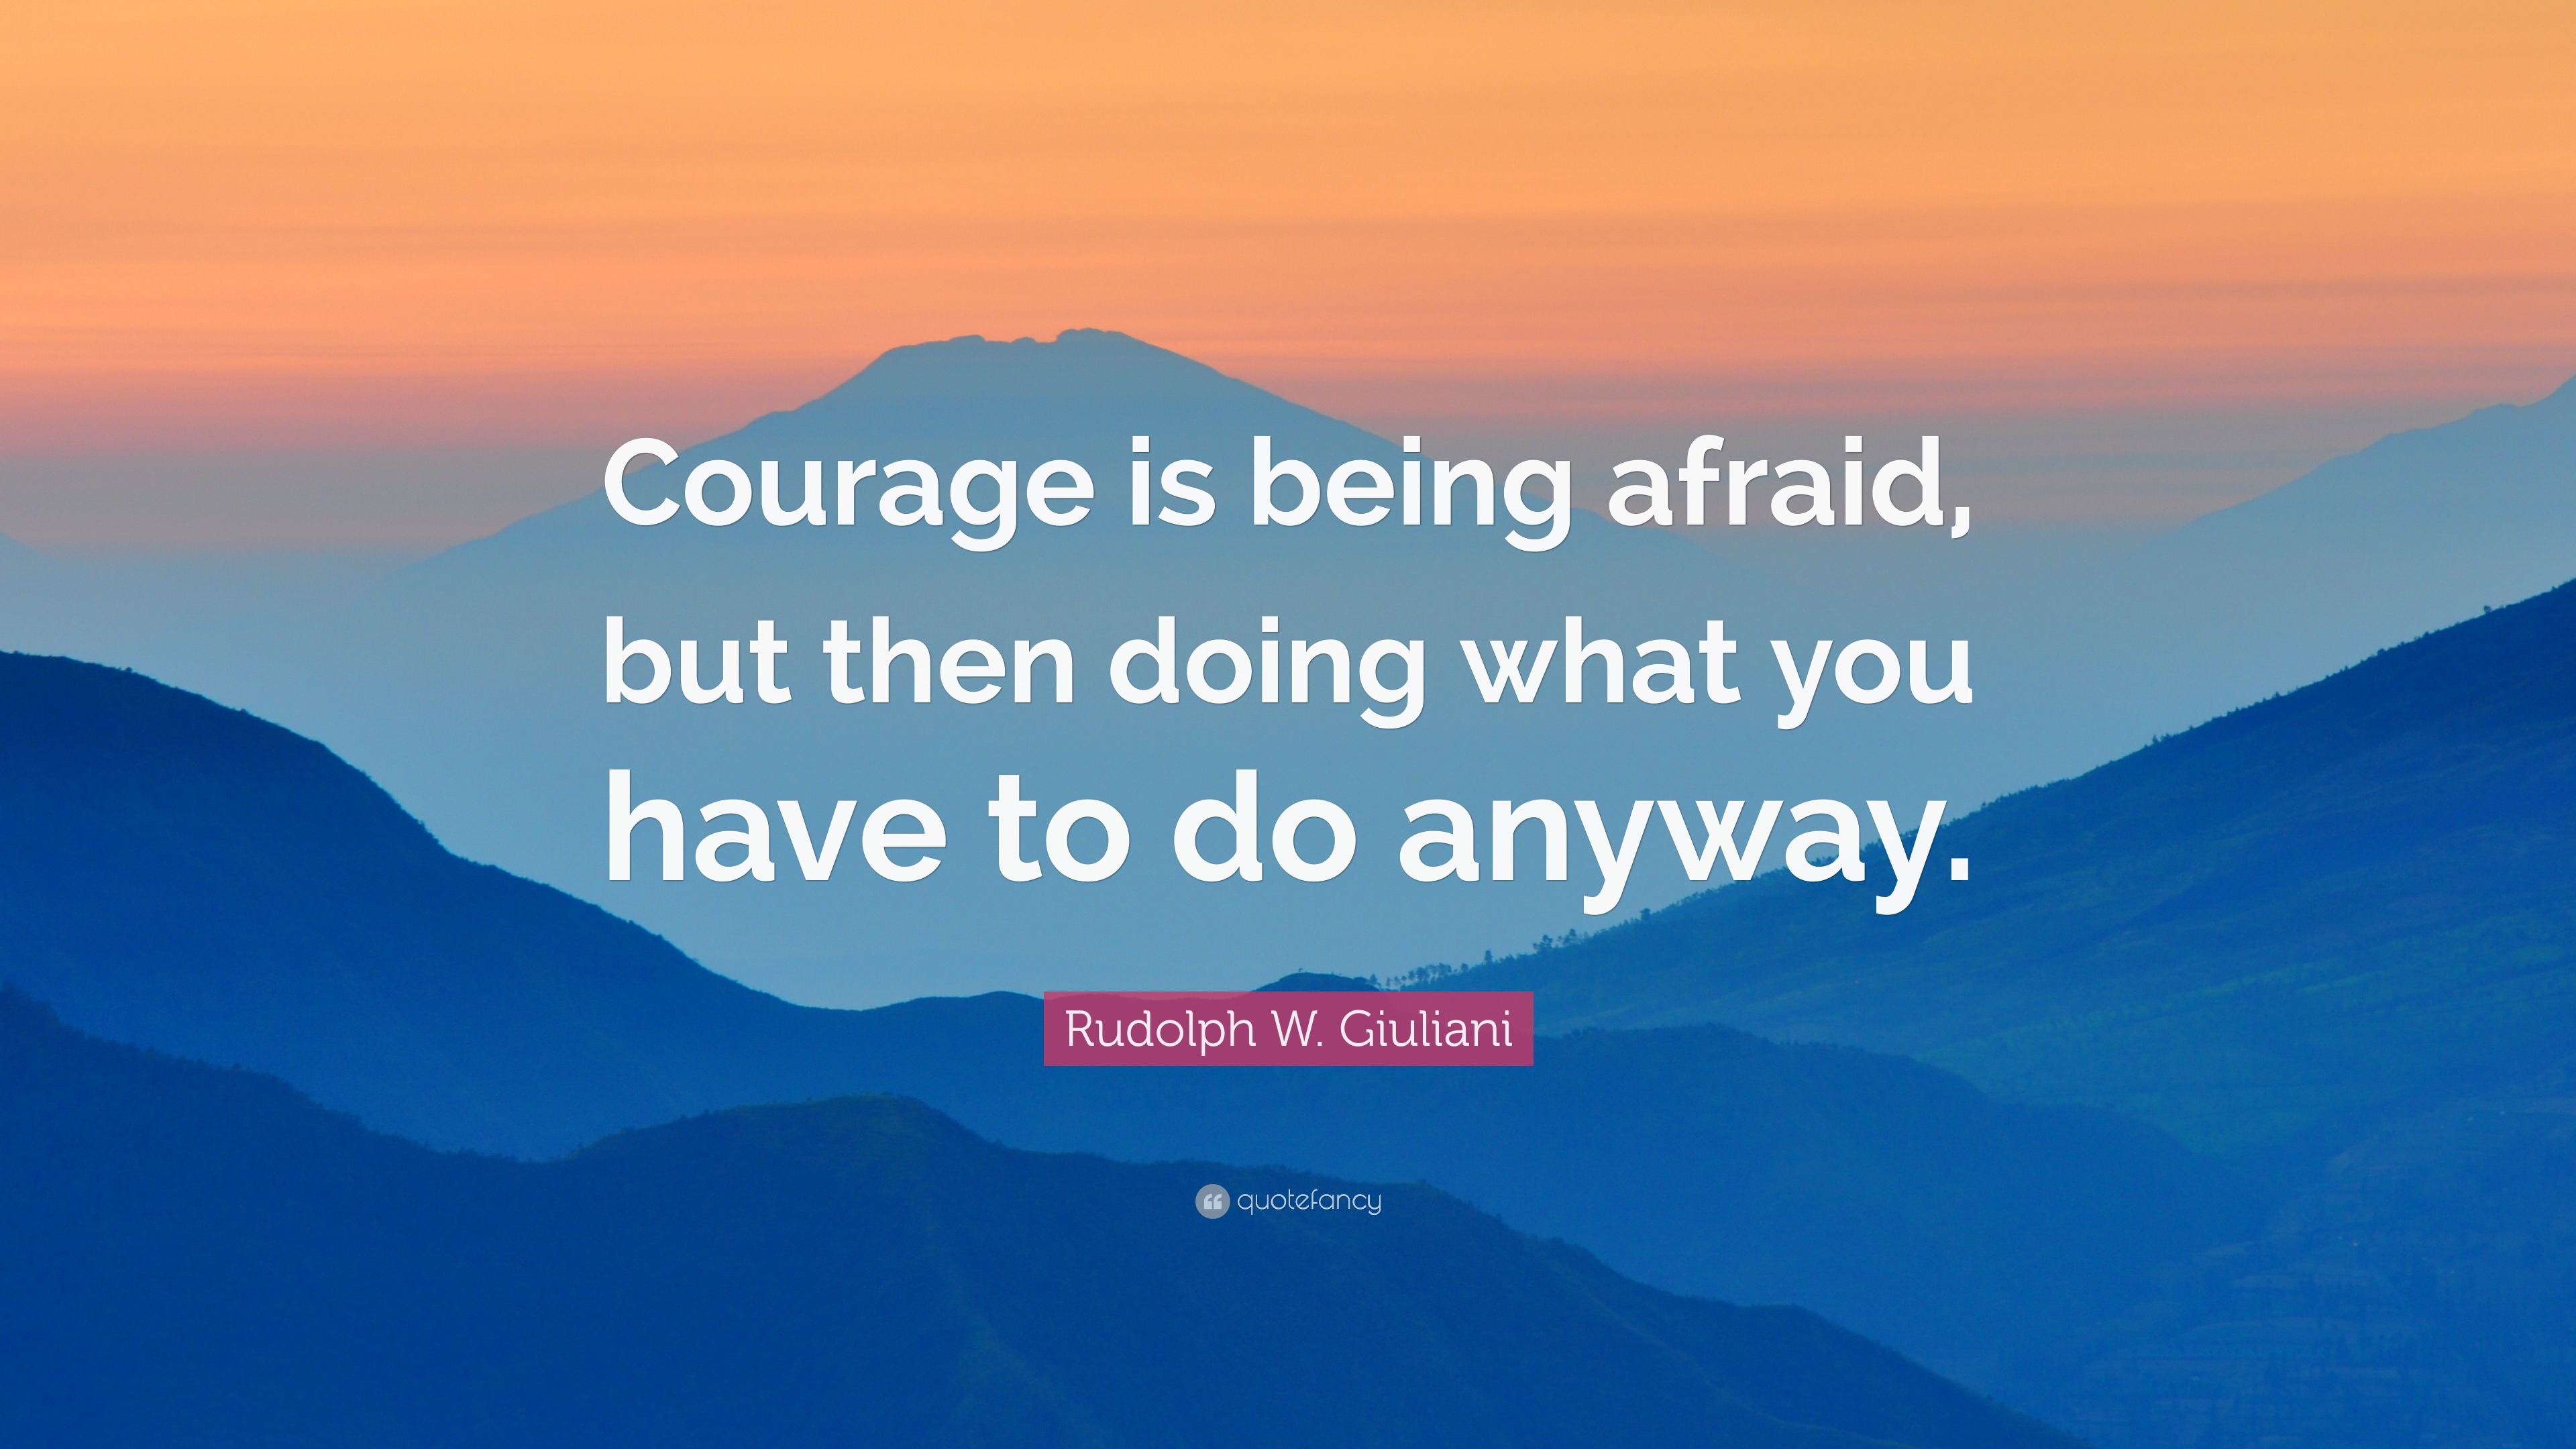 Rudolph W. Giuliani Quote: “Courage is being afraid, but then doing ...